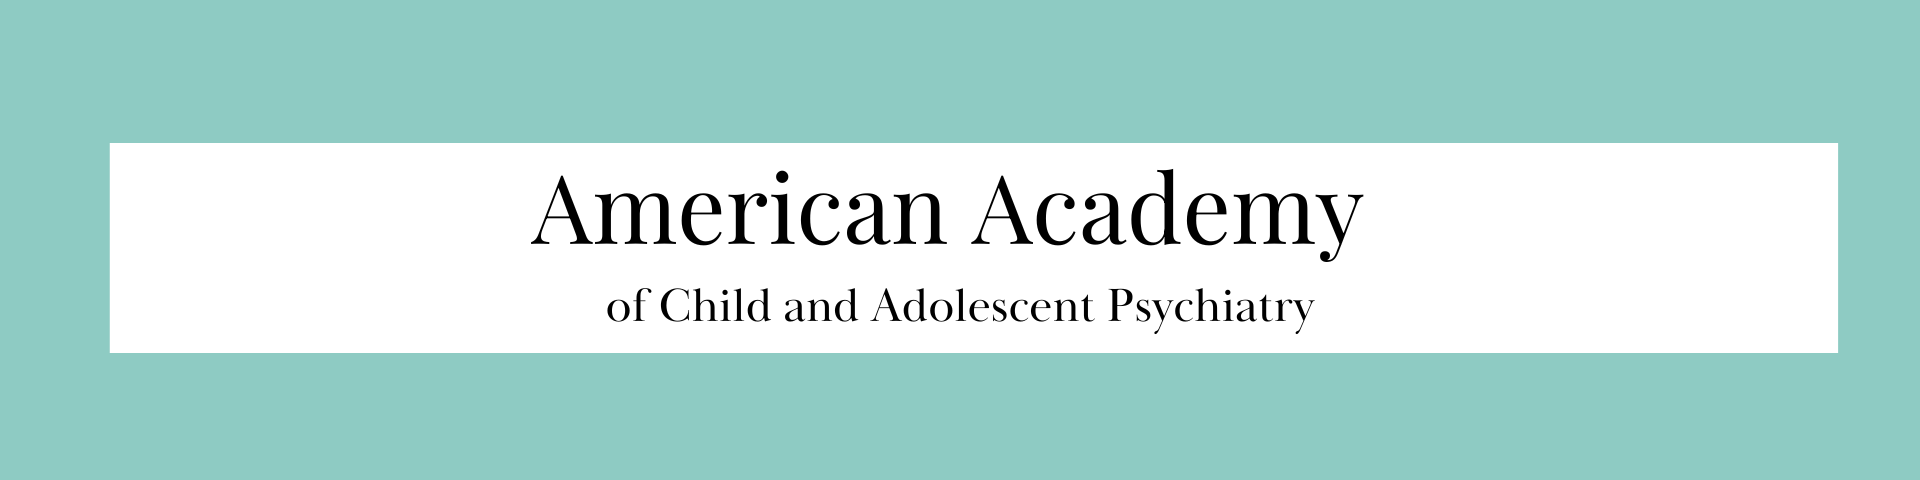 American Academy of Child and Adolescent Psychiatry (Link)